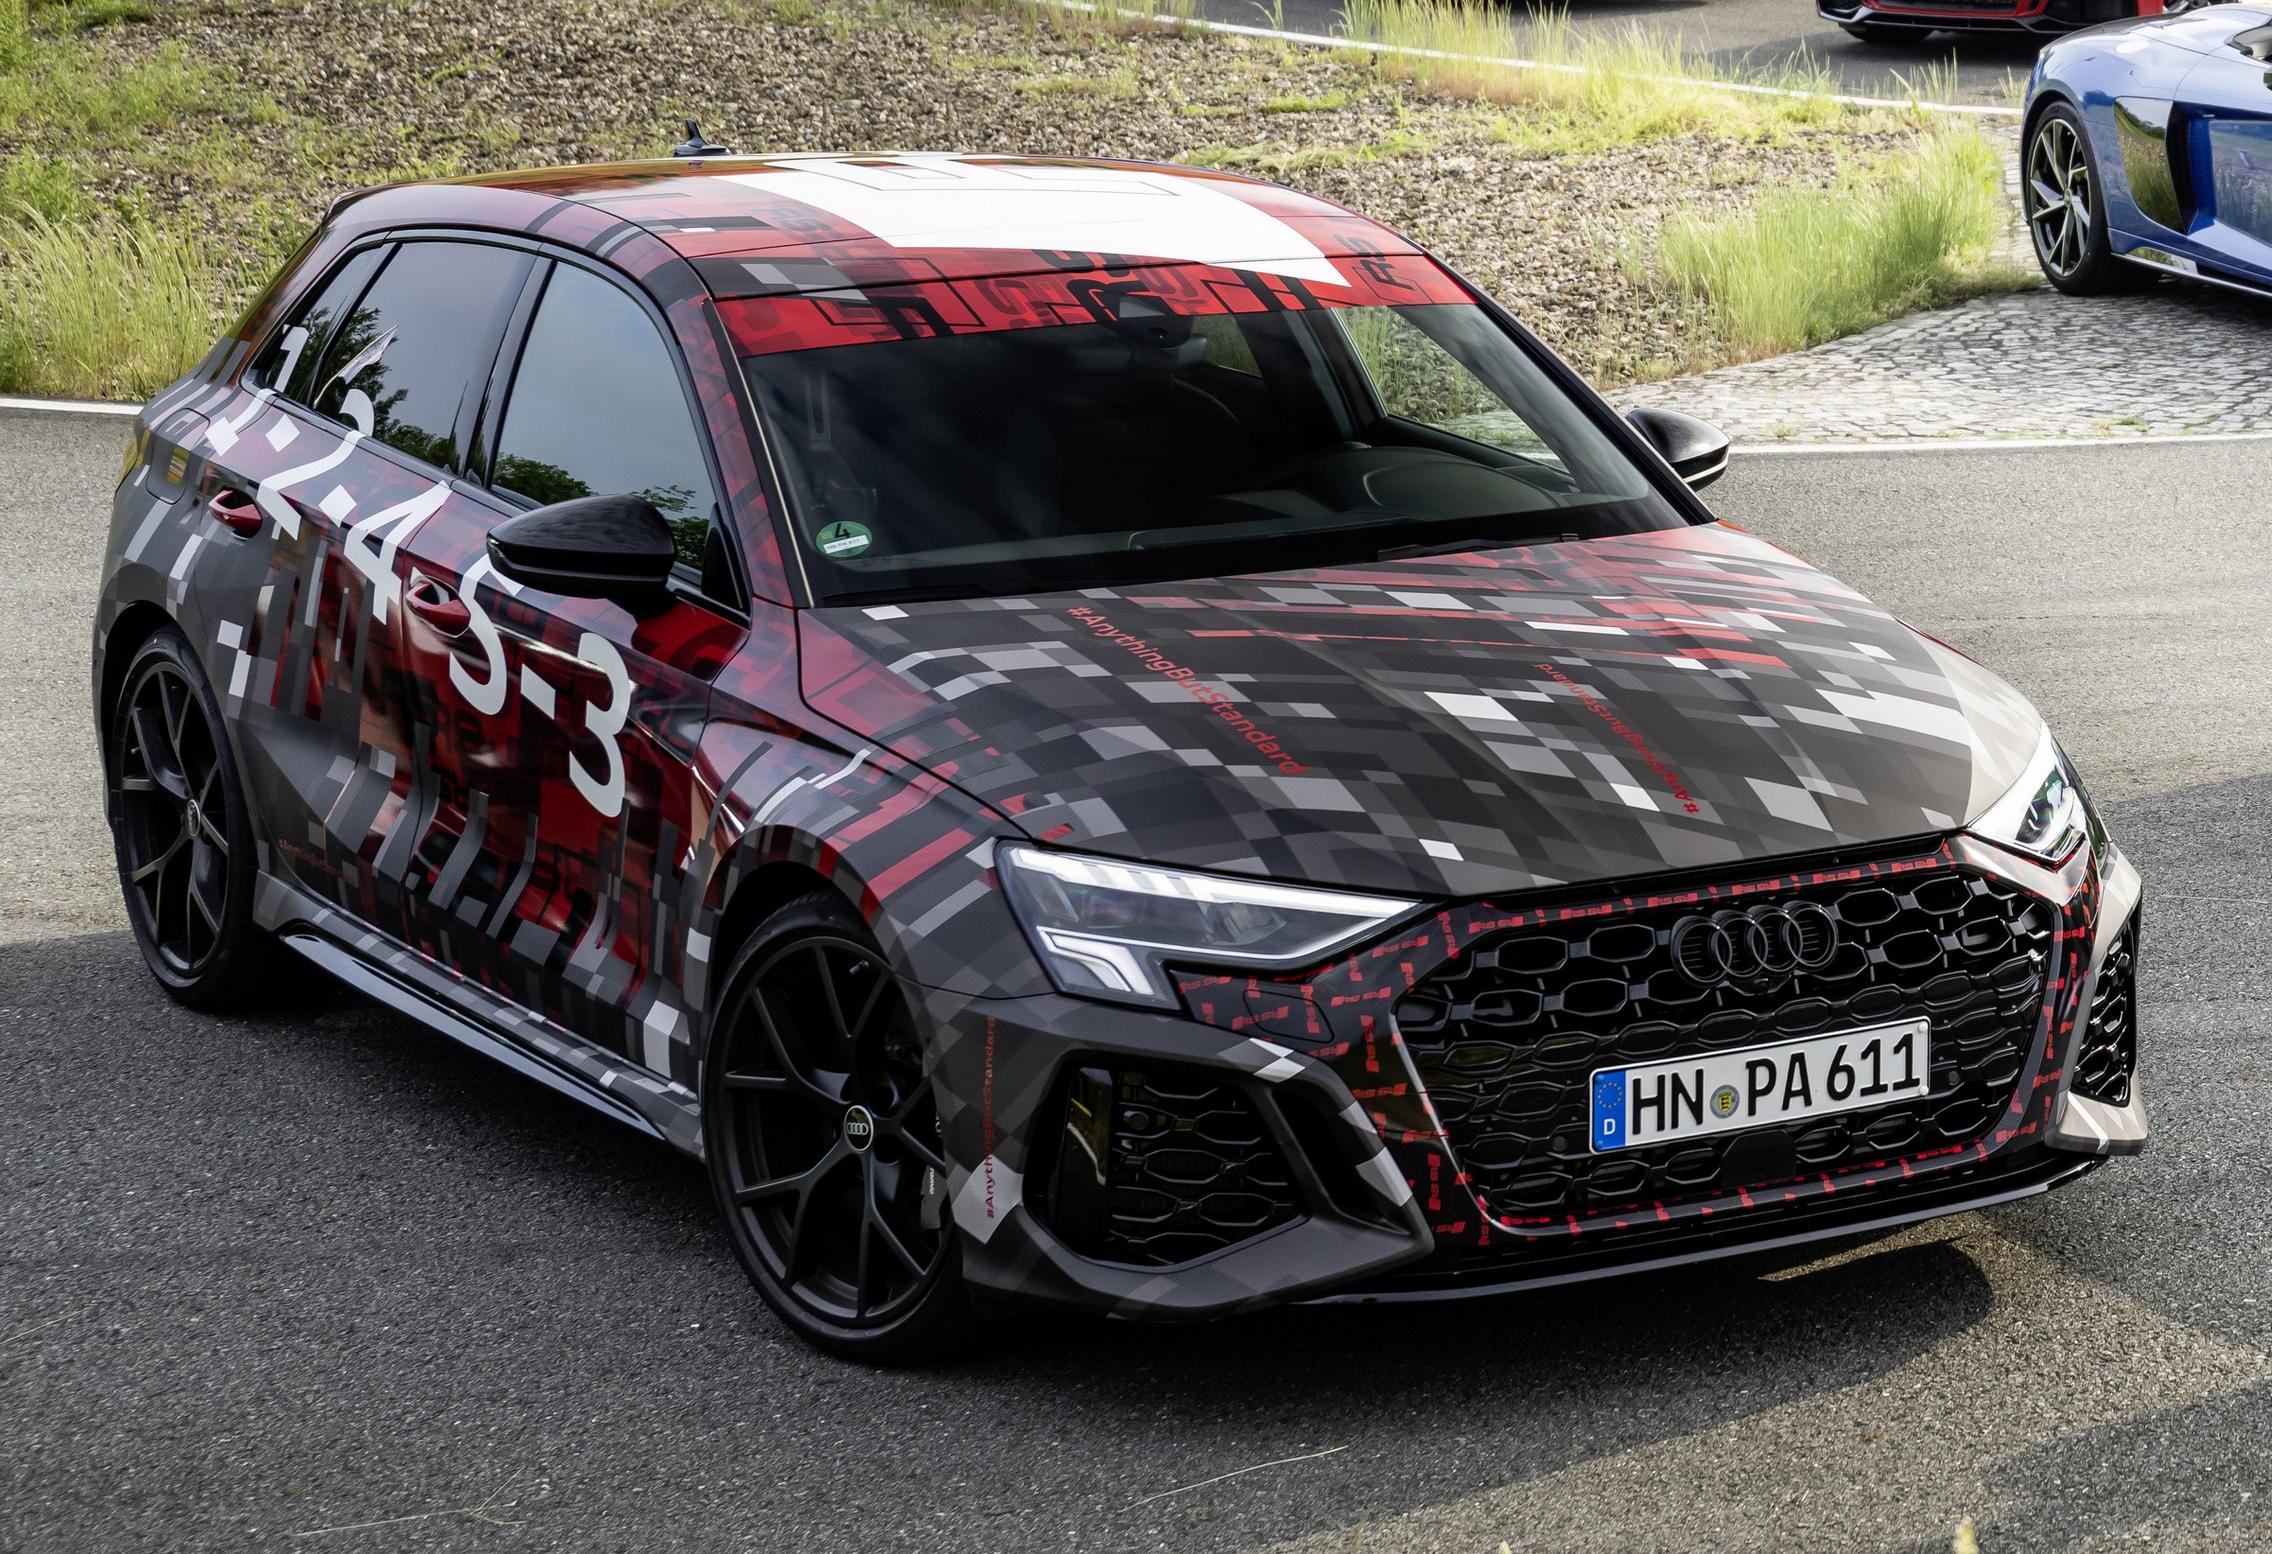 Super Hatch Territory: 2022 Audi RS3 to Launch in July, Rivals A45 S AMG -  GTspirit